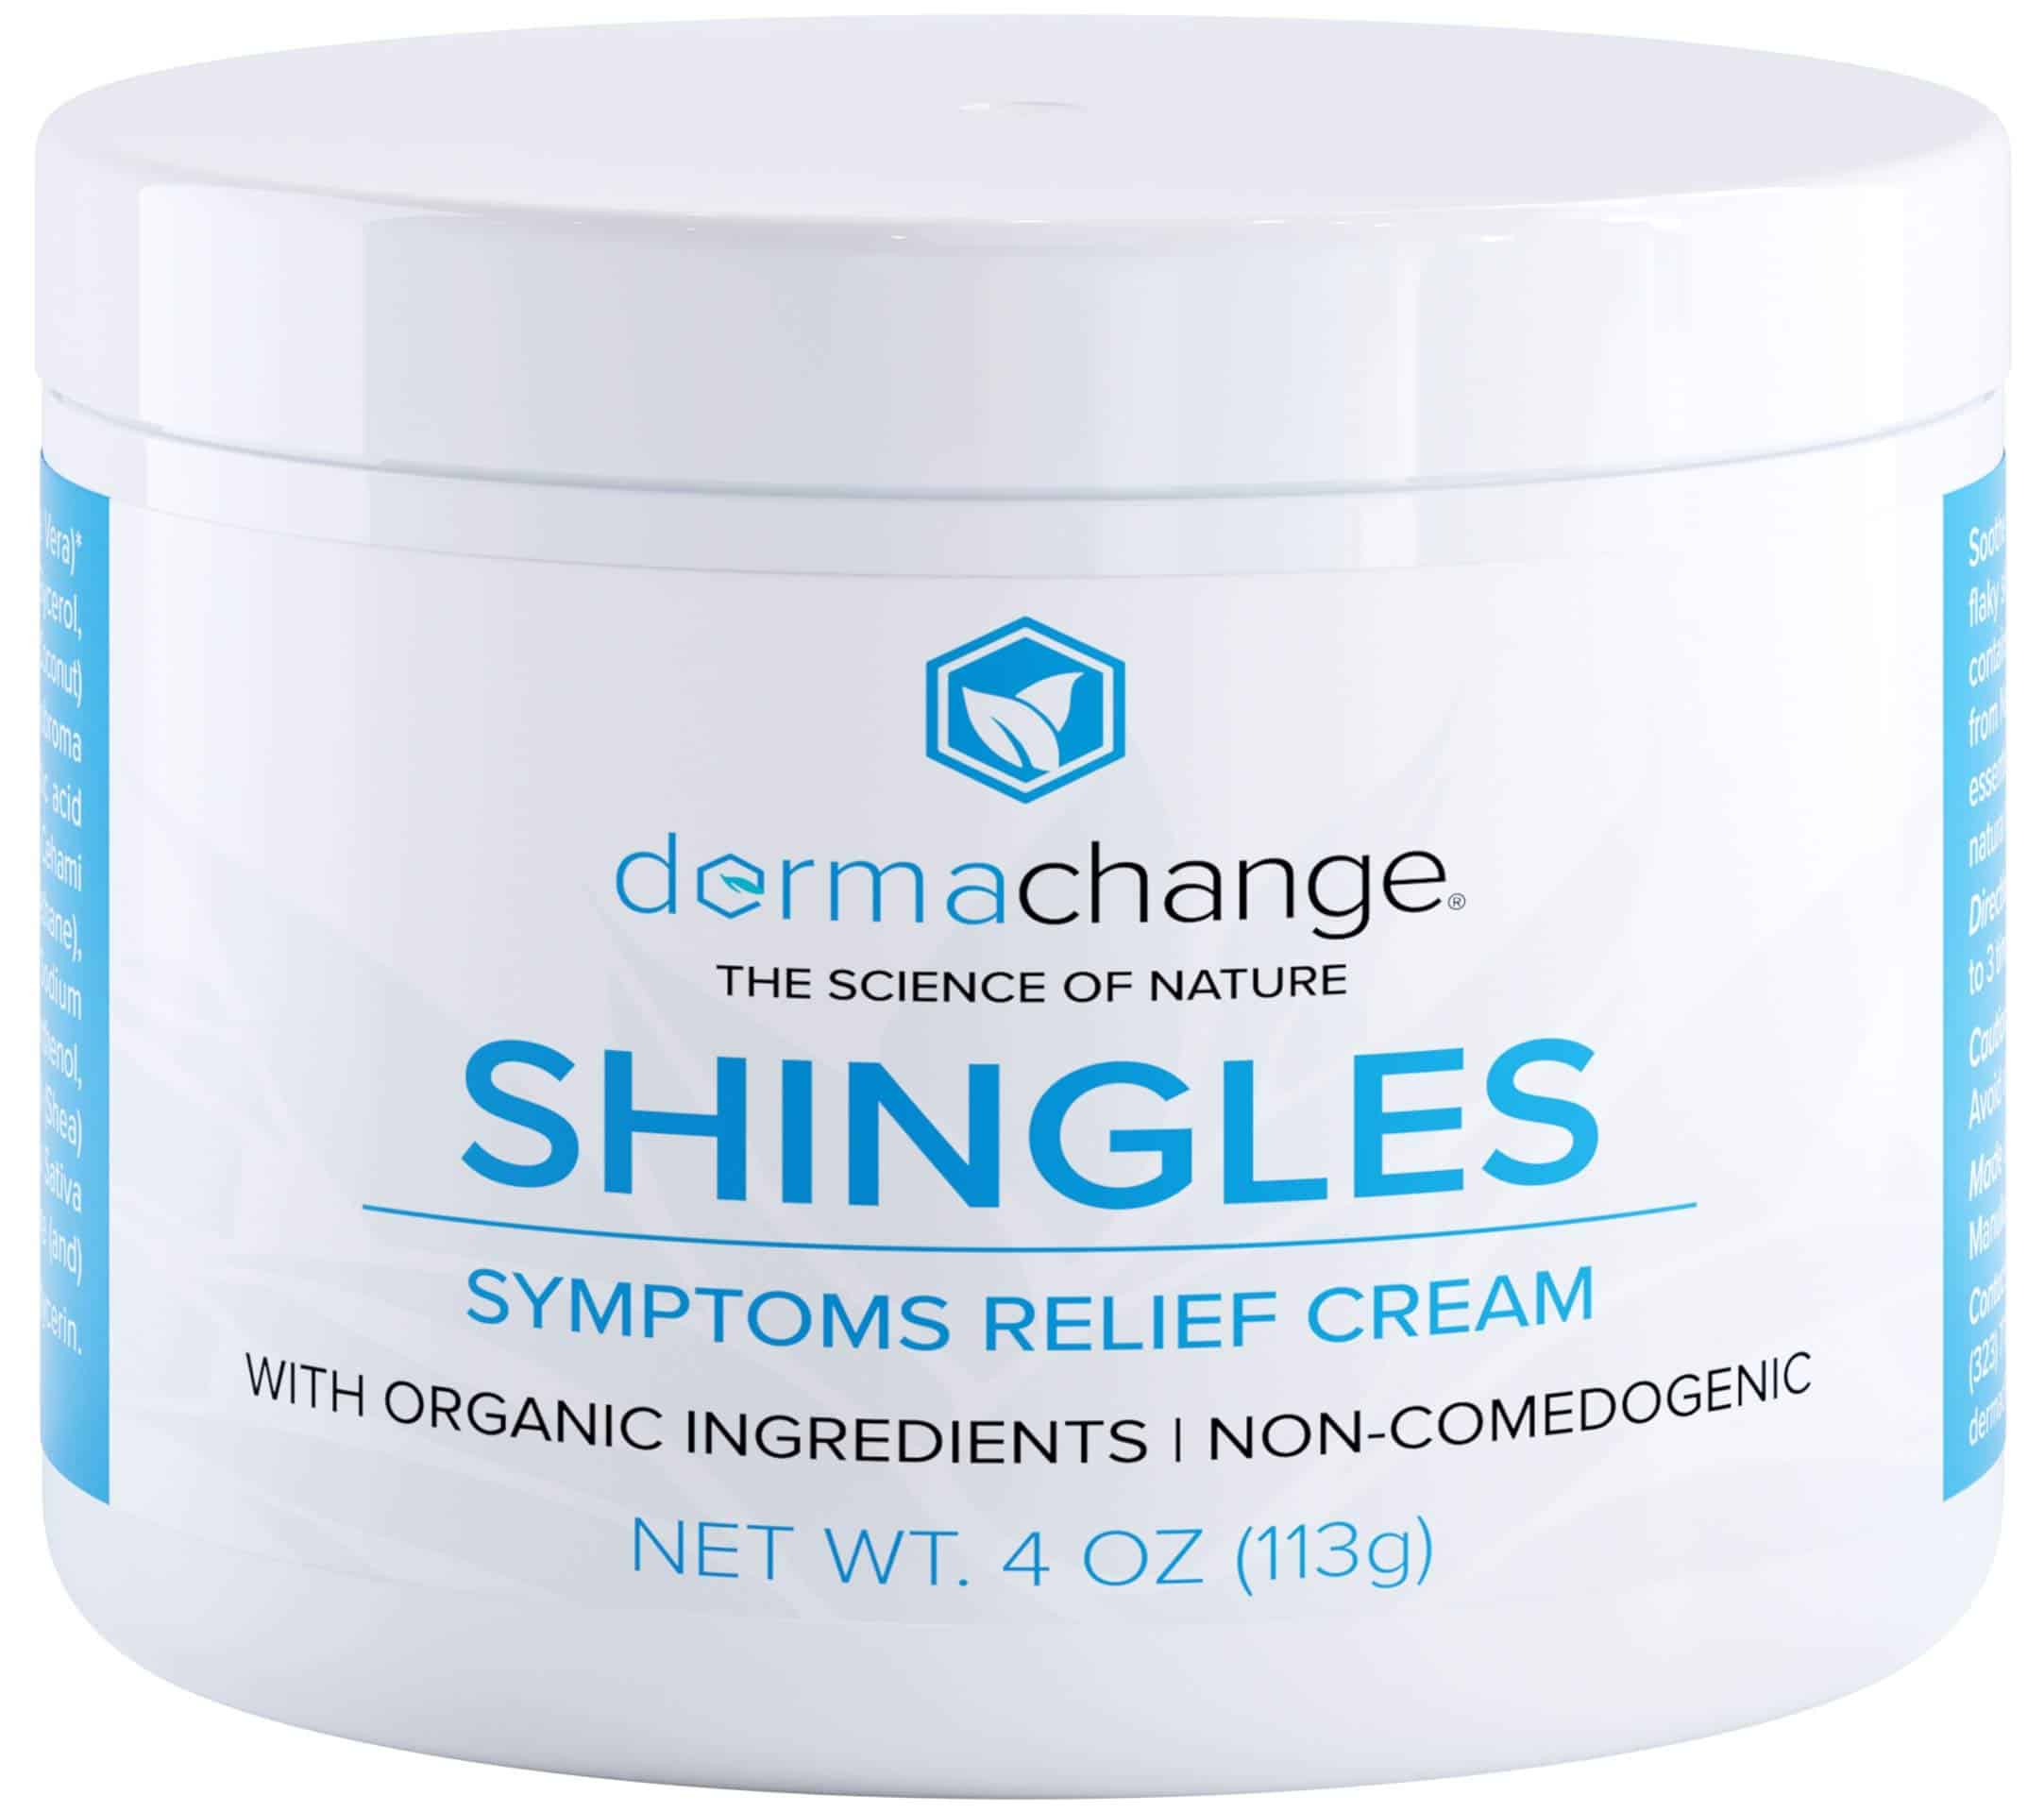 What Prescription Cream Is Used For Shingles